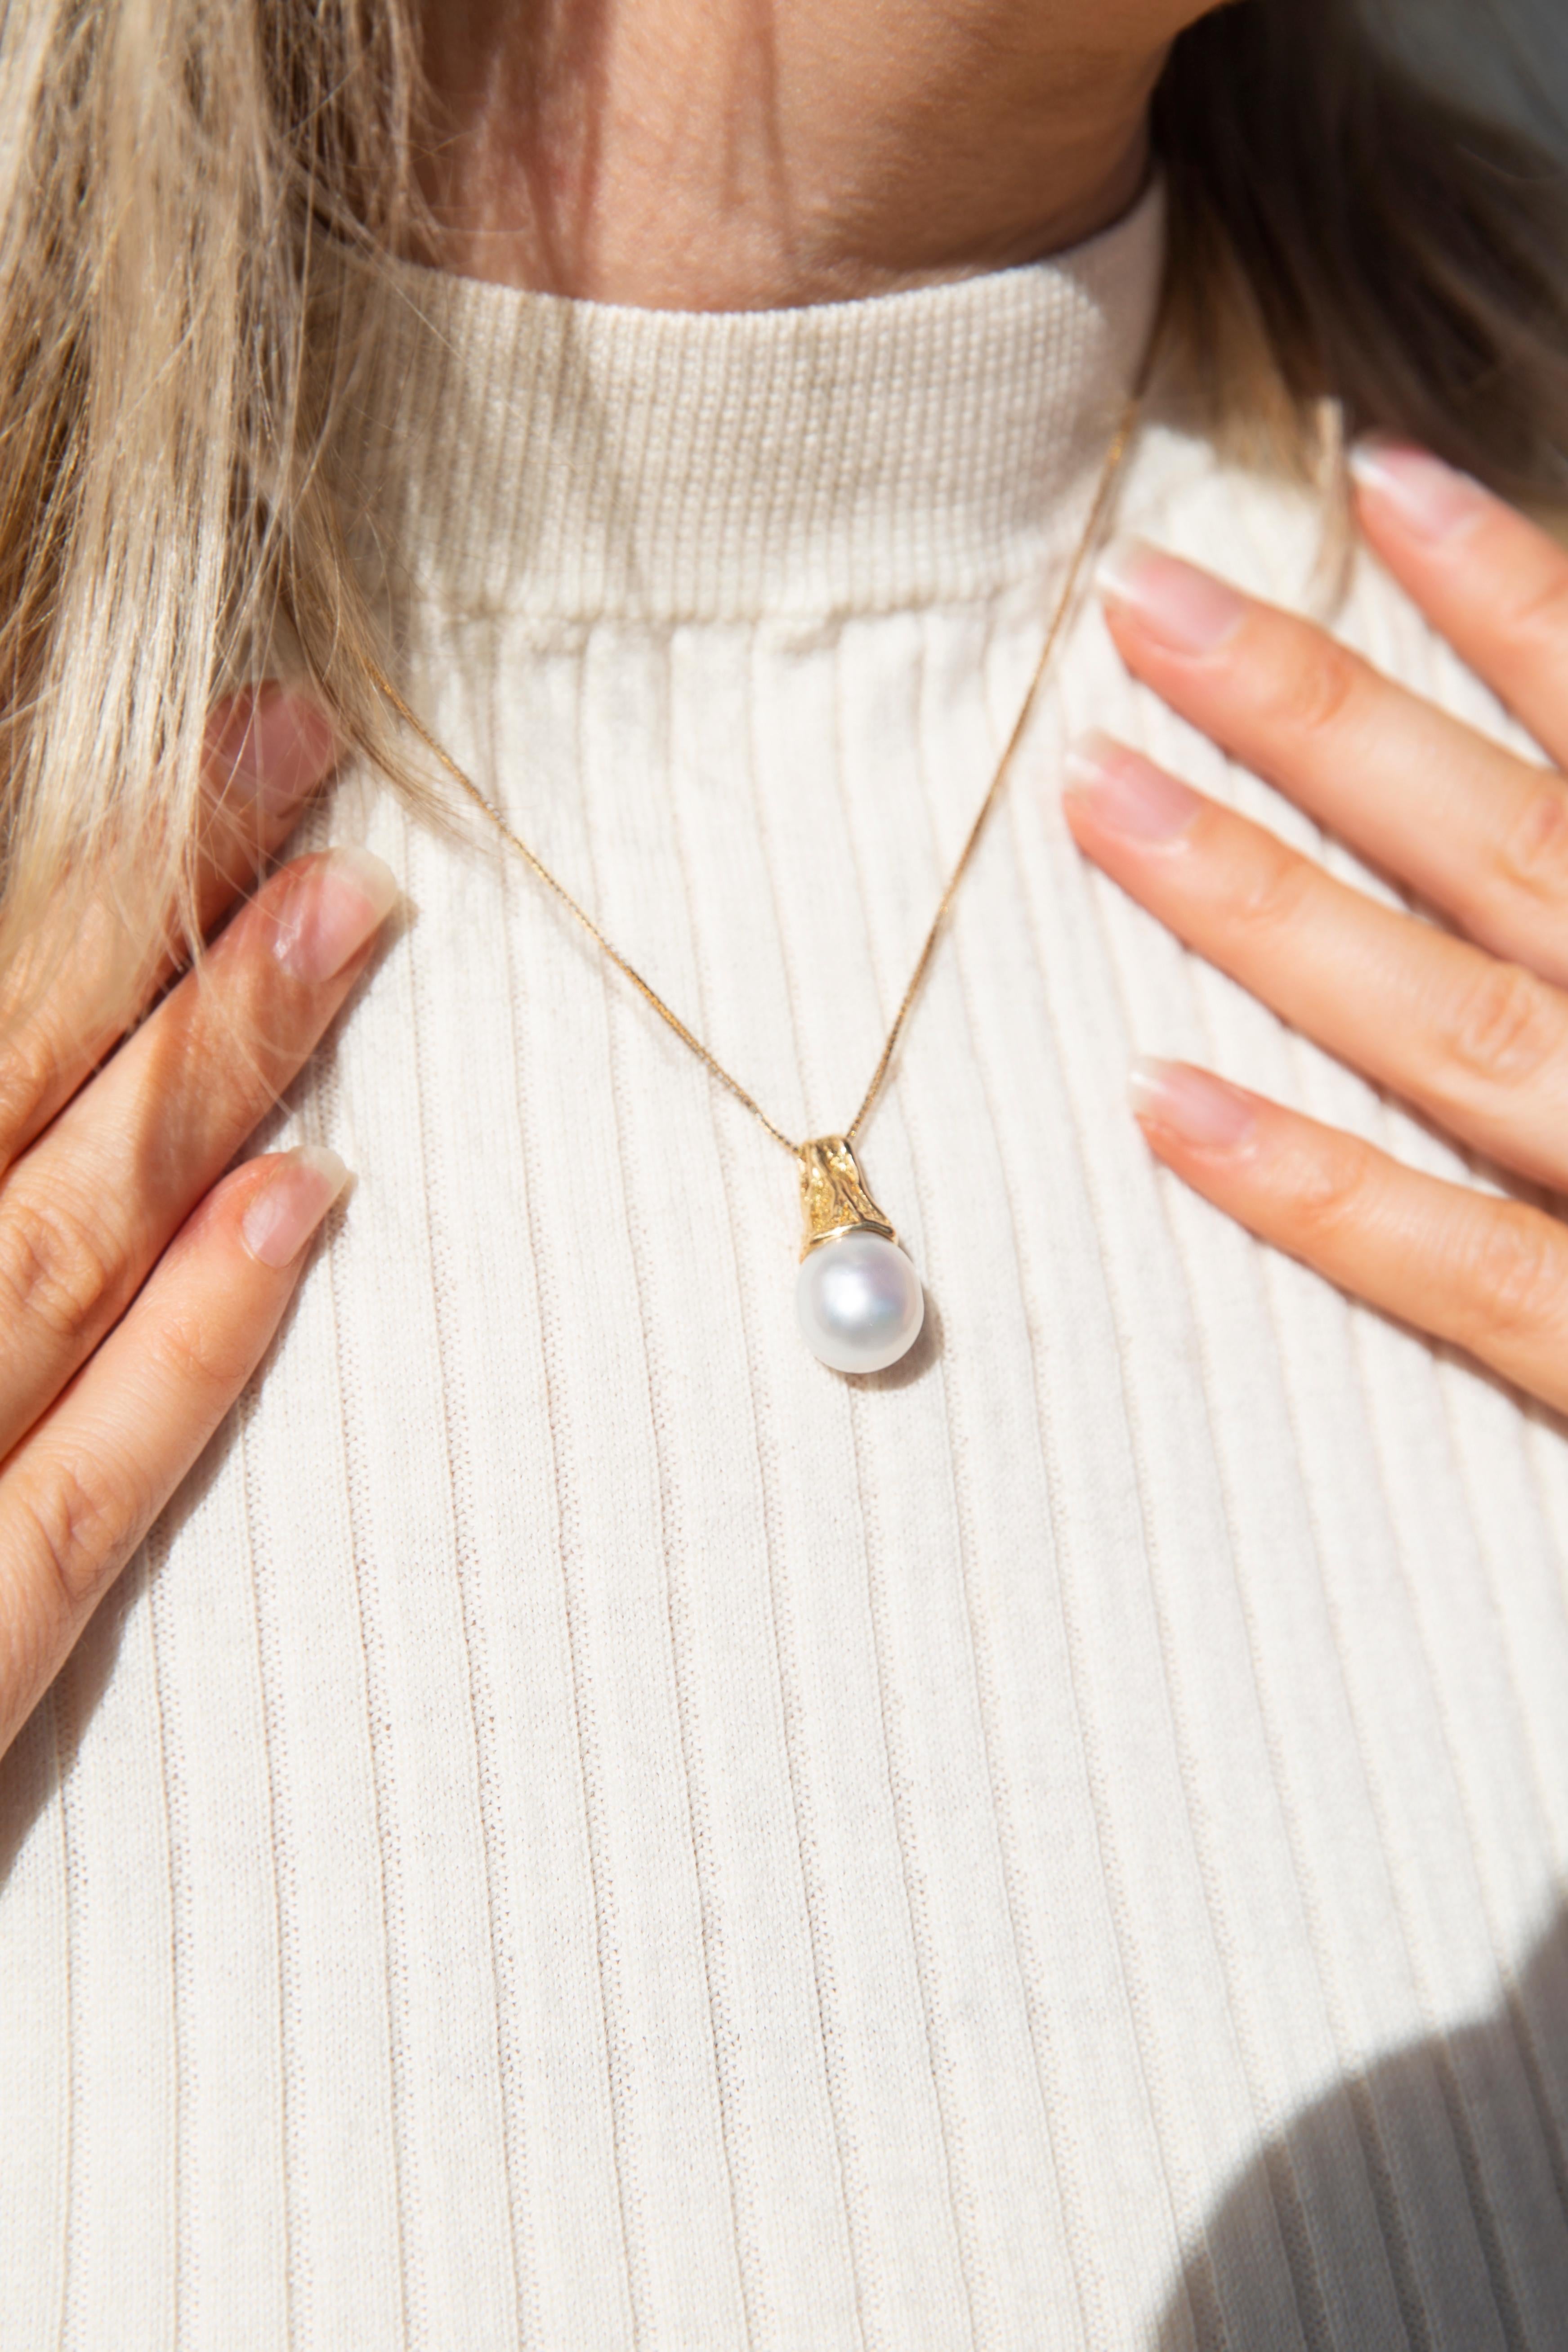 Crafted in 9 carat yellow gold, this darling pendant features a lustrous white baroque South Sea pearl in a natural rock-textured bail. She is named The Darby Pendant & Chain. She is threaded with a fine chain and evokes strong feelings of precious